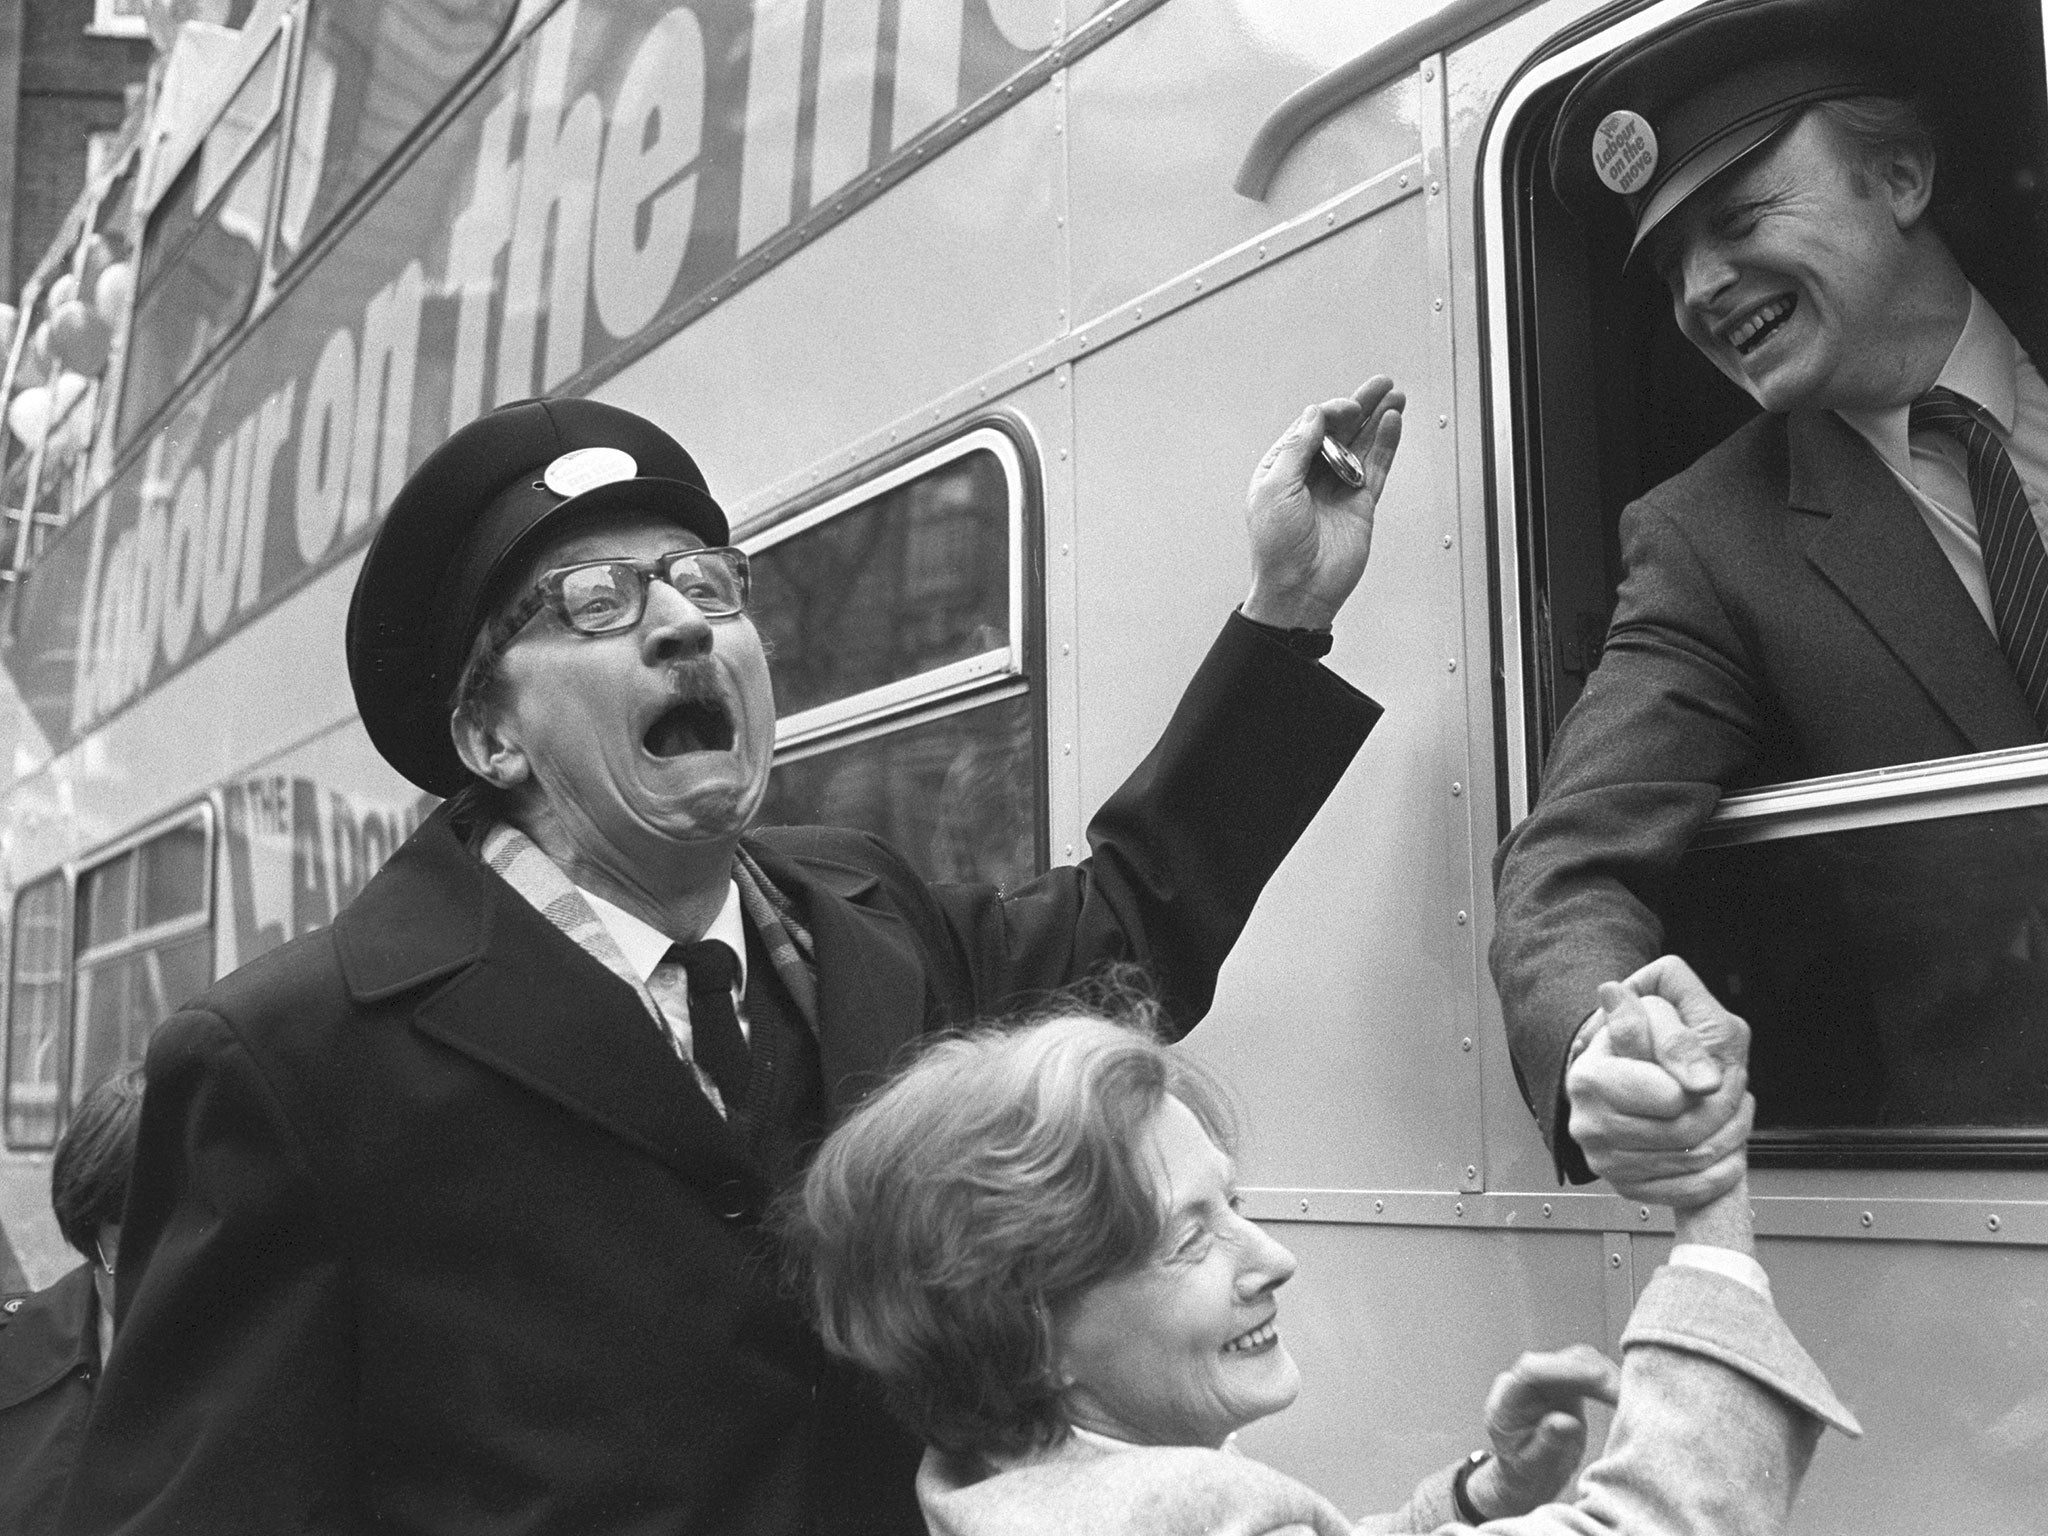 Lewis in character as Blakey in 1984, launching the Labour Party’s European elections campaign bus with Neil Kinnock and Barbara Castle